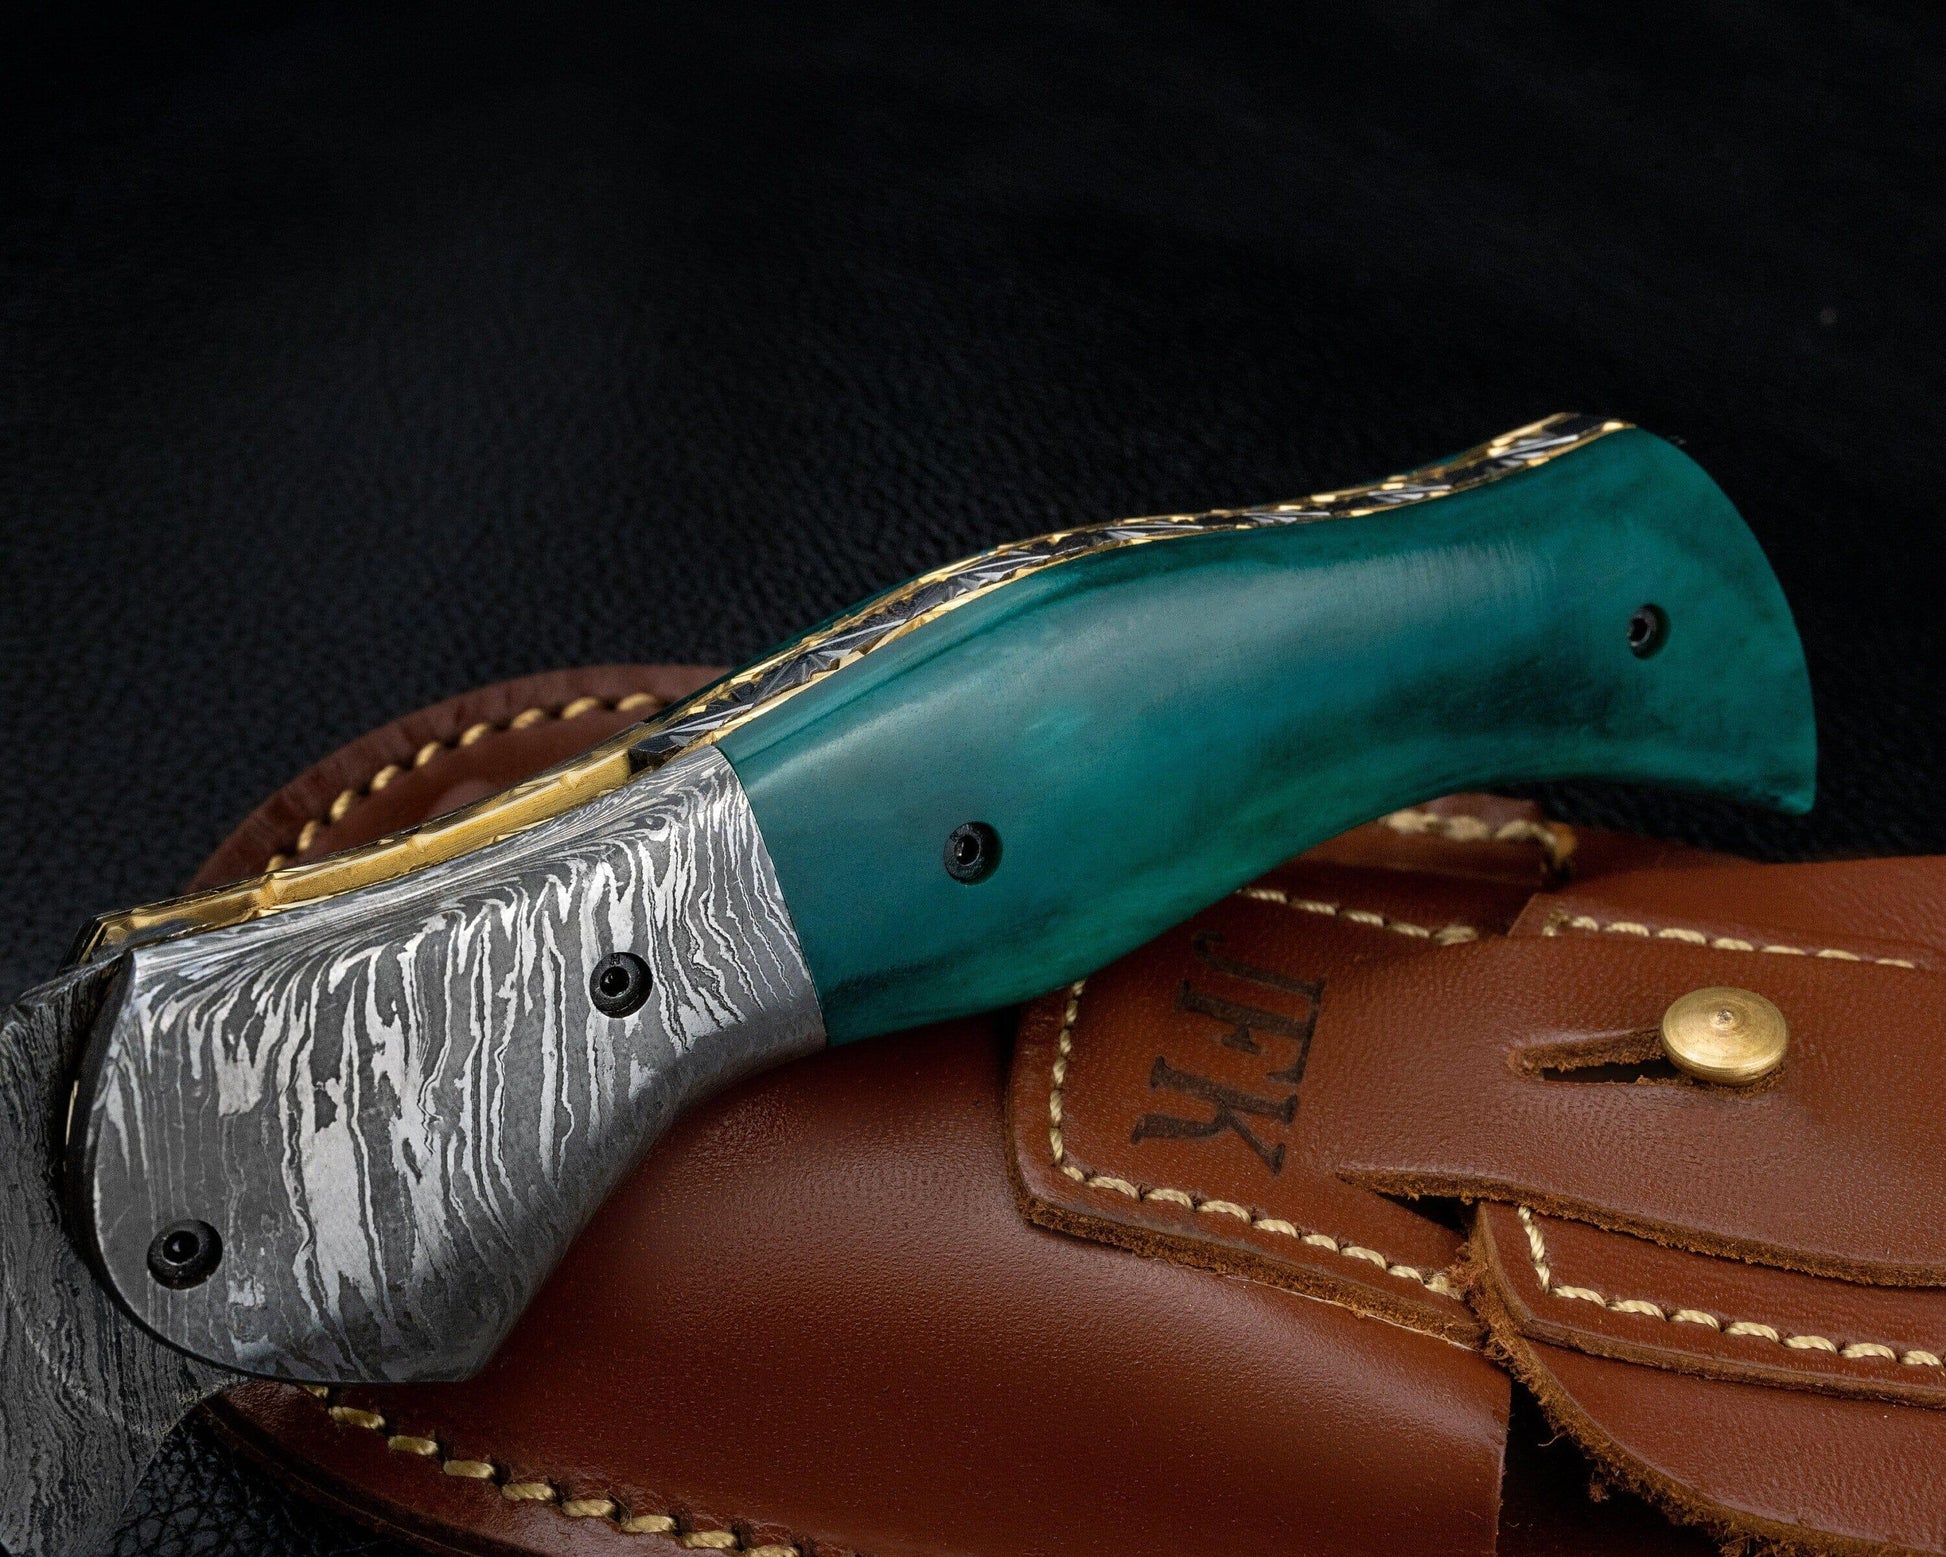 Luxury Hand Forged Damascus Folding Knife, Green Handle Damascus Steel Pocket Hunting knife, Luxury Fold Knife, Gift For DAD, Gift For Him Etsy 